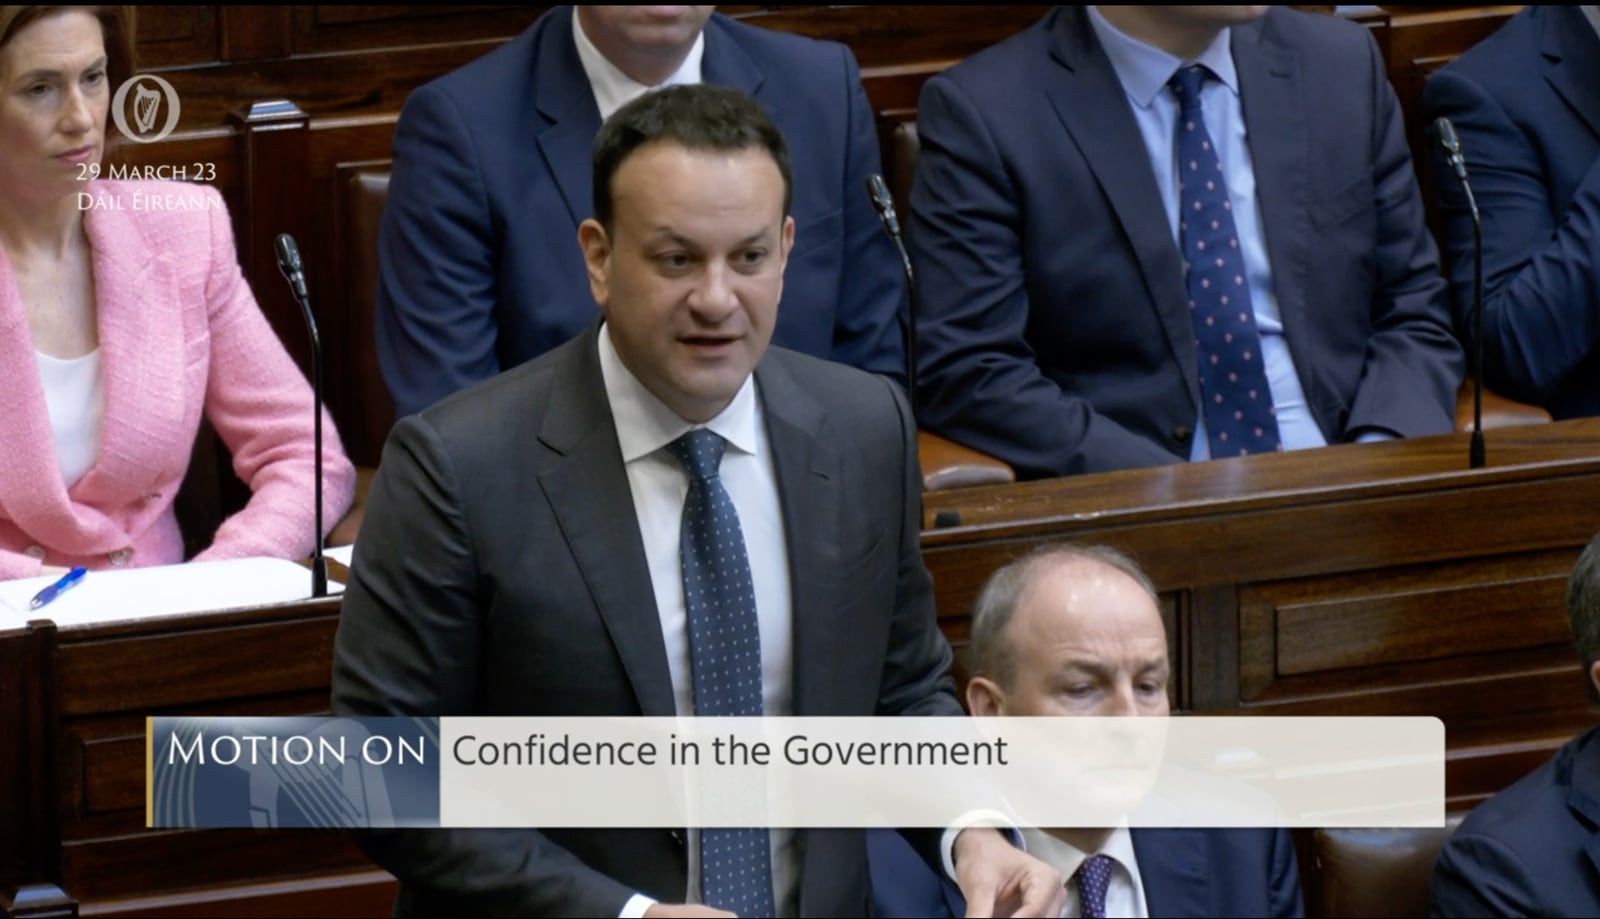 Taoiseach Leo Varadkar speaking in the Dáil on Wednesday, March 29th during a debate on a Labour Party motion of no confidence in the Government